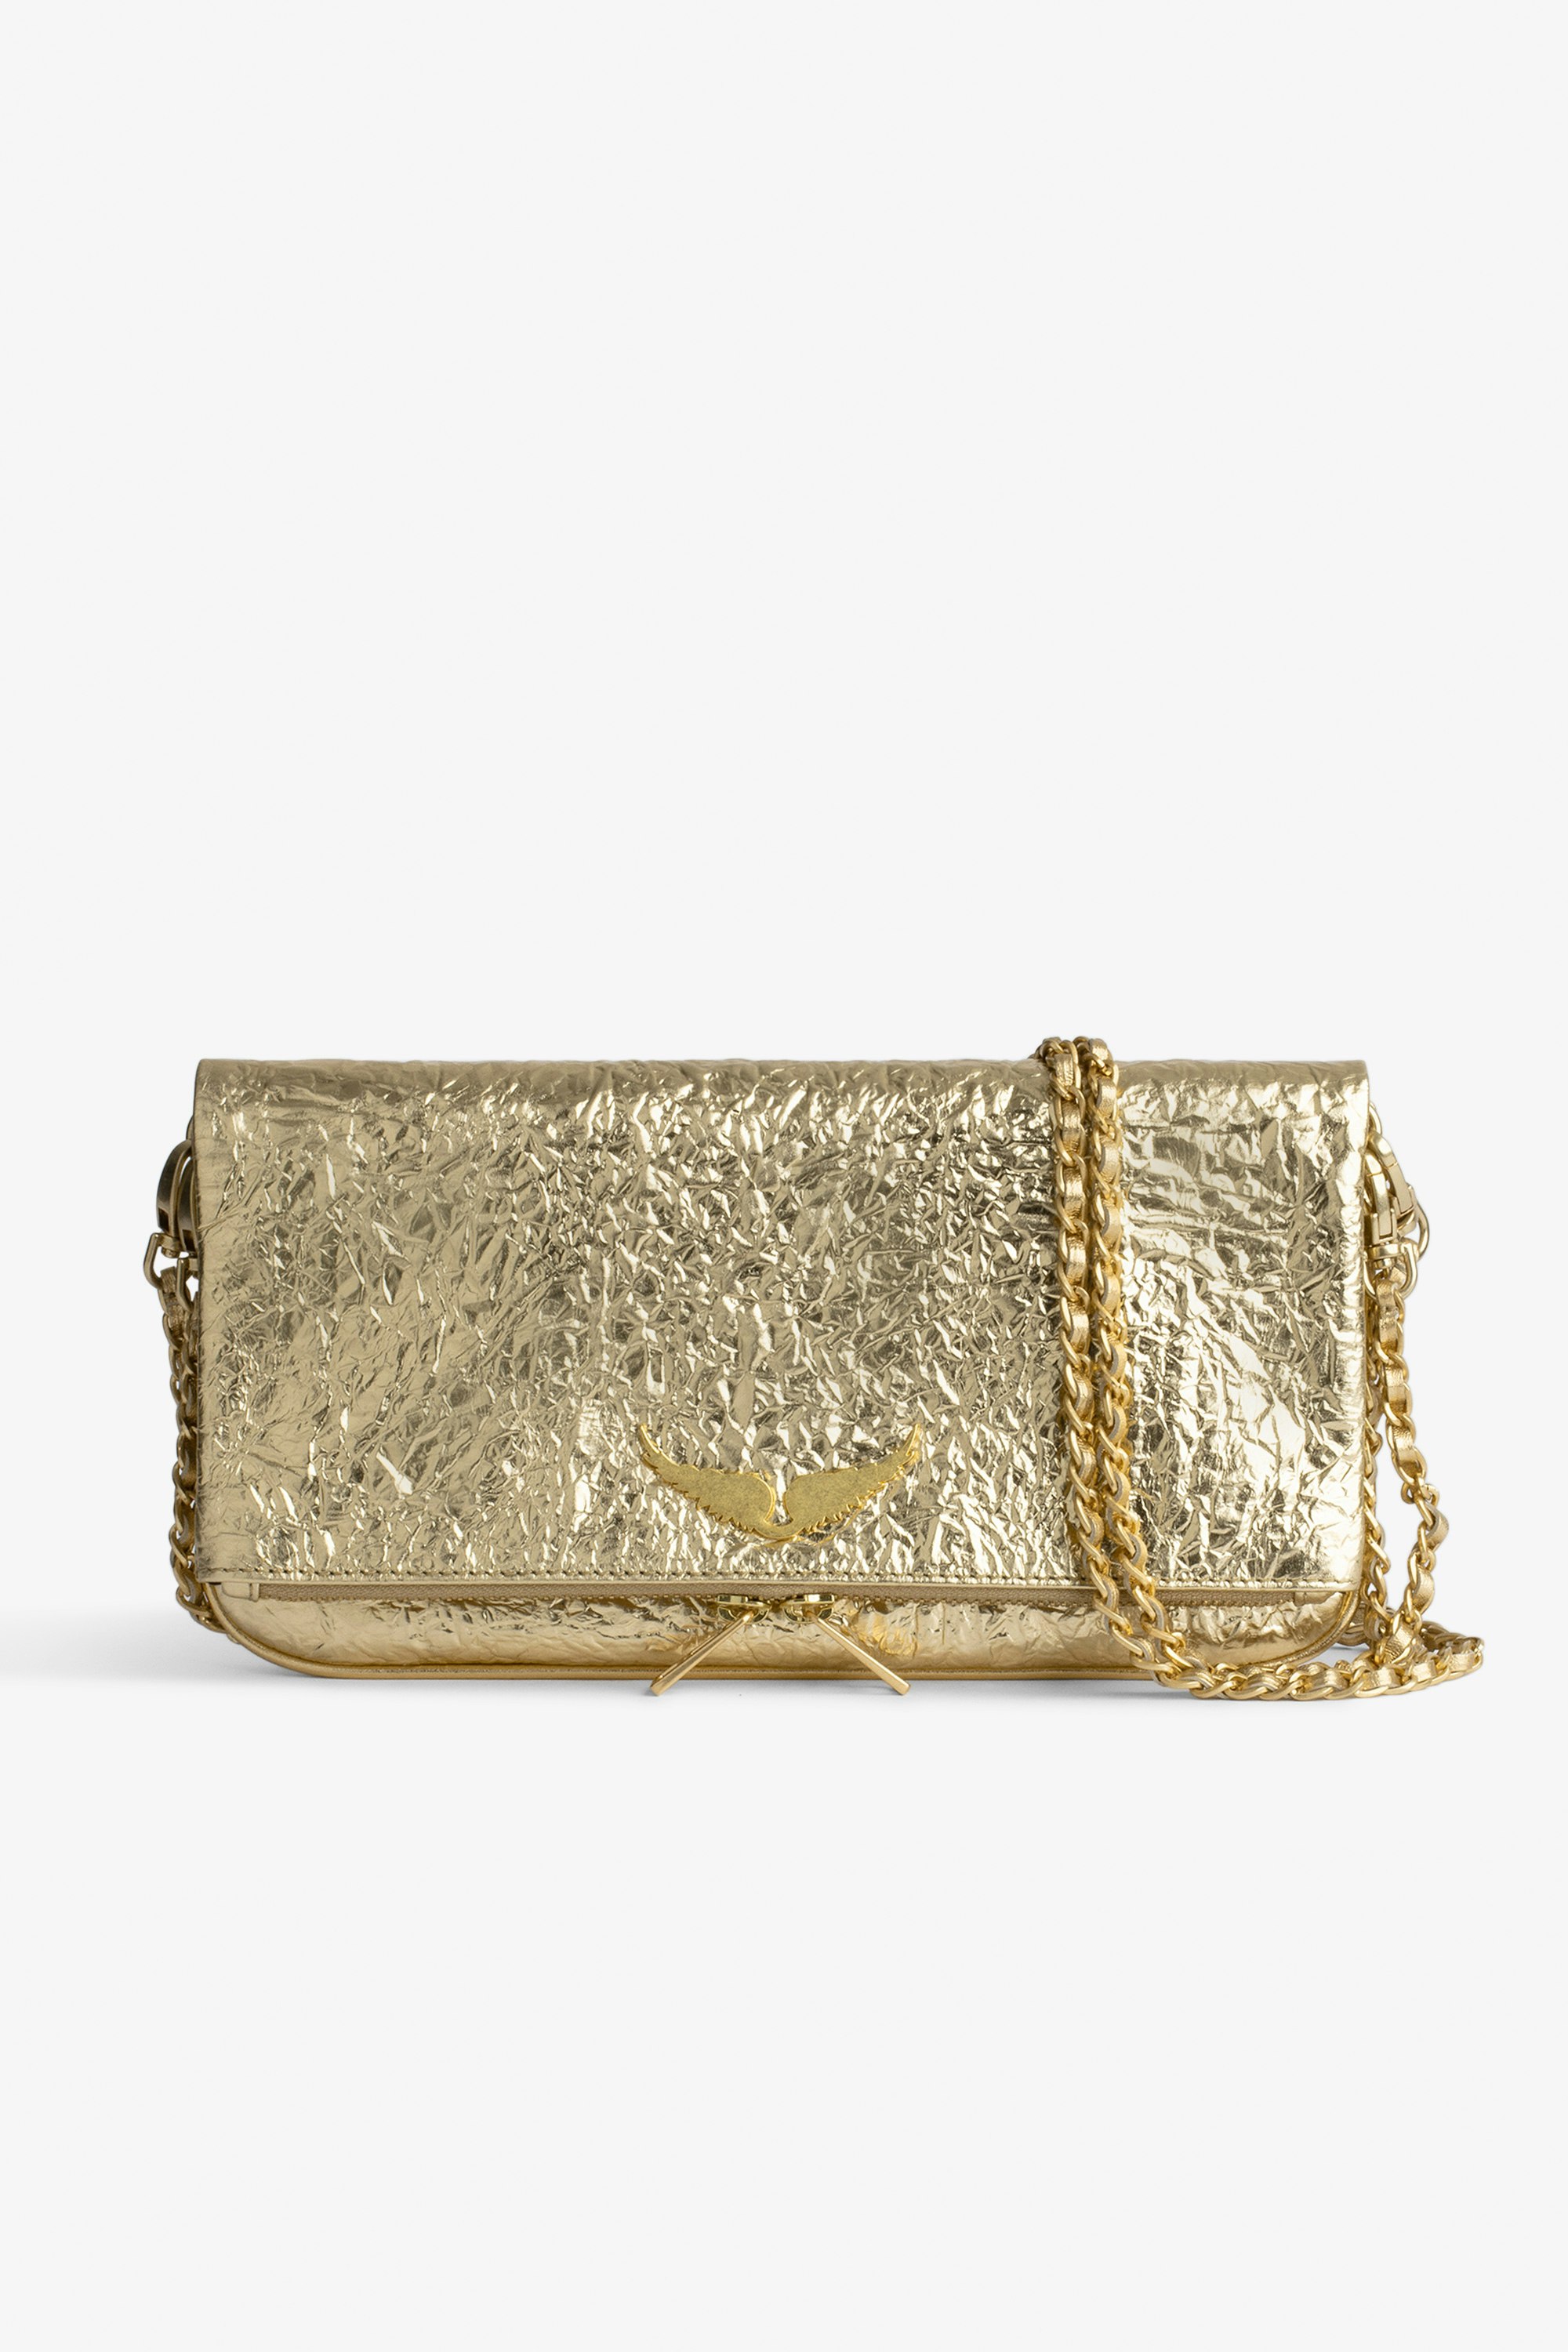 Rock Clutch Women’s Rock clutch in metallic gold crinkled leather with leather and chain shoulder strap